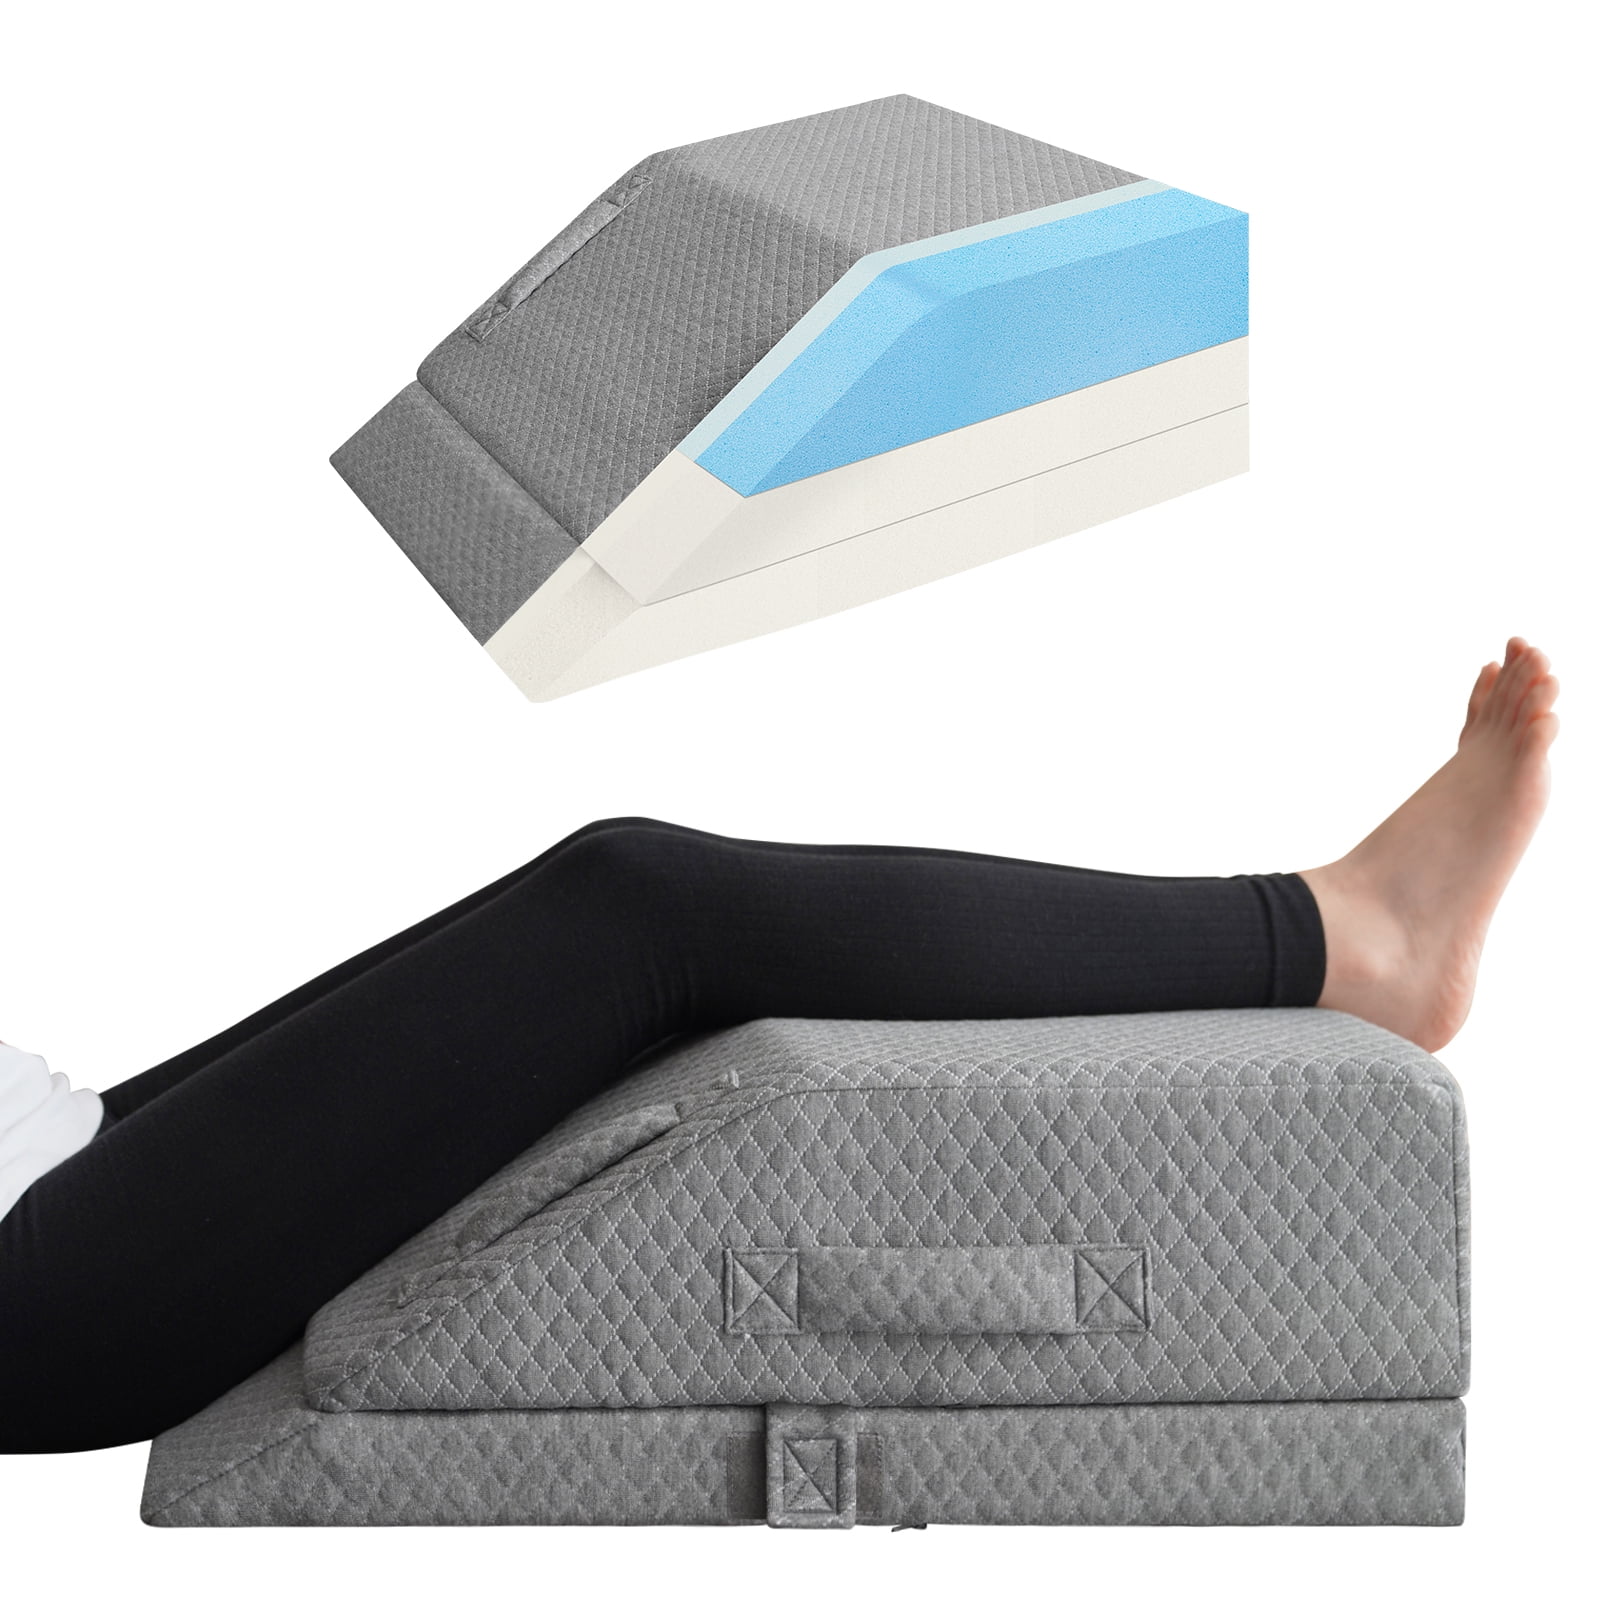 InteVision Ortho Bed Wedge Pillow with a, Removable Cover (8 x 21 x 24)  - Post Surgery Elevating Leg Rest Pillow with Memory Foam Top - Provides